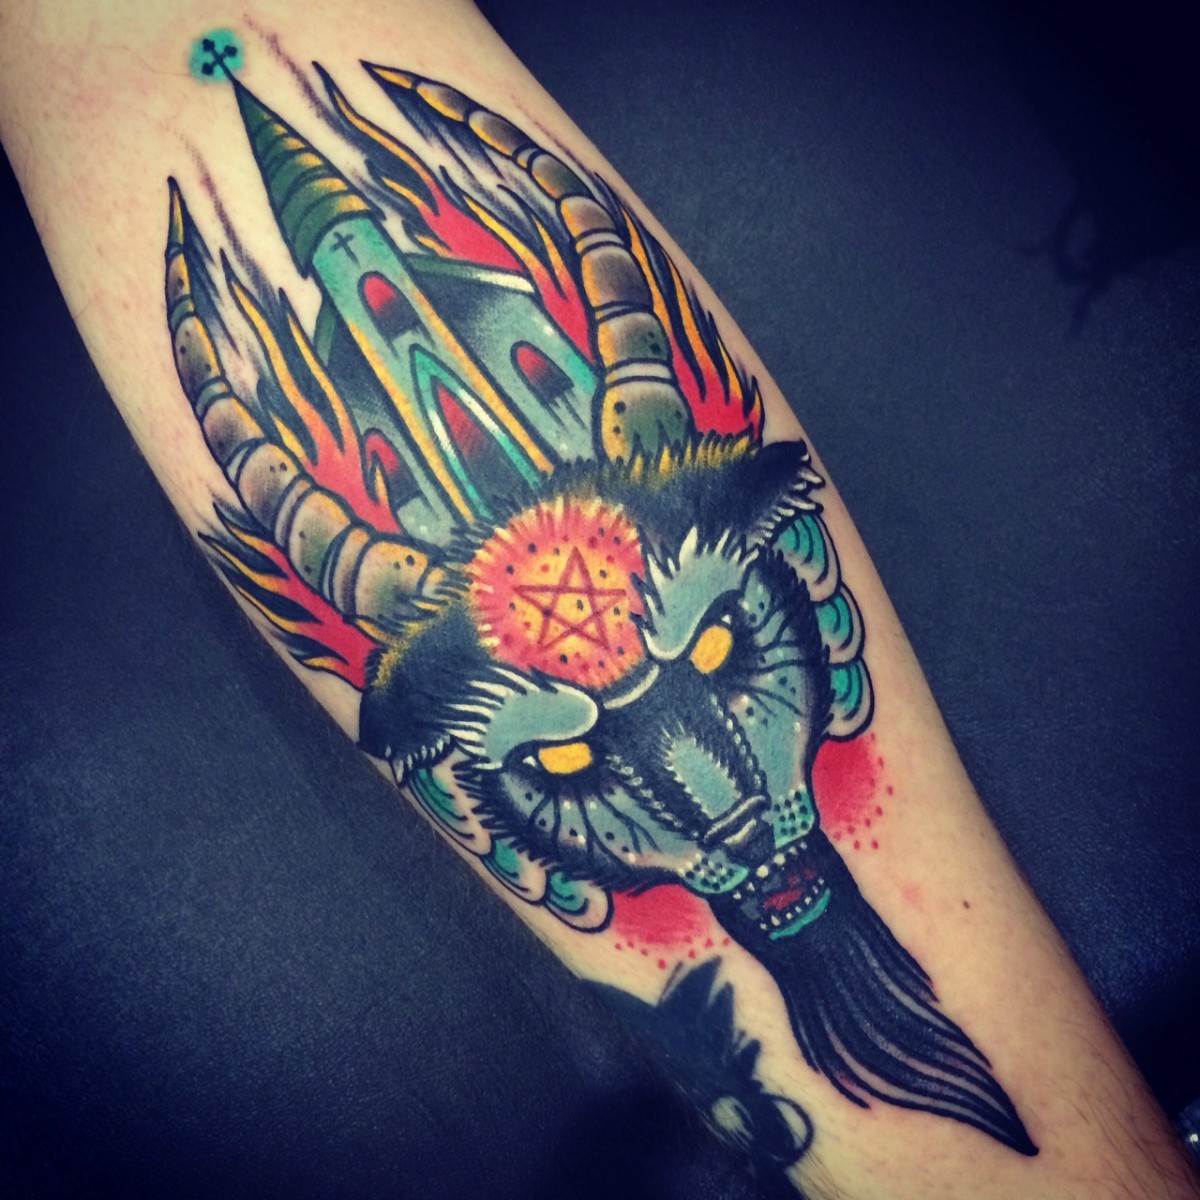 Goat head with a burning church between the horns. Miguel Lepage from Saving Grace Tattoo in Montreal, Quebec. (Done at the Vancouver Tattoo and Culture)